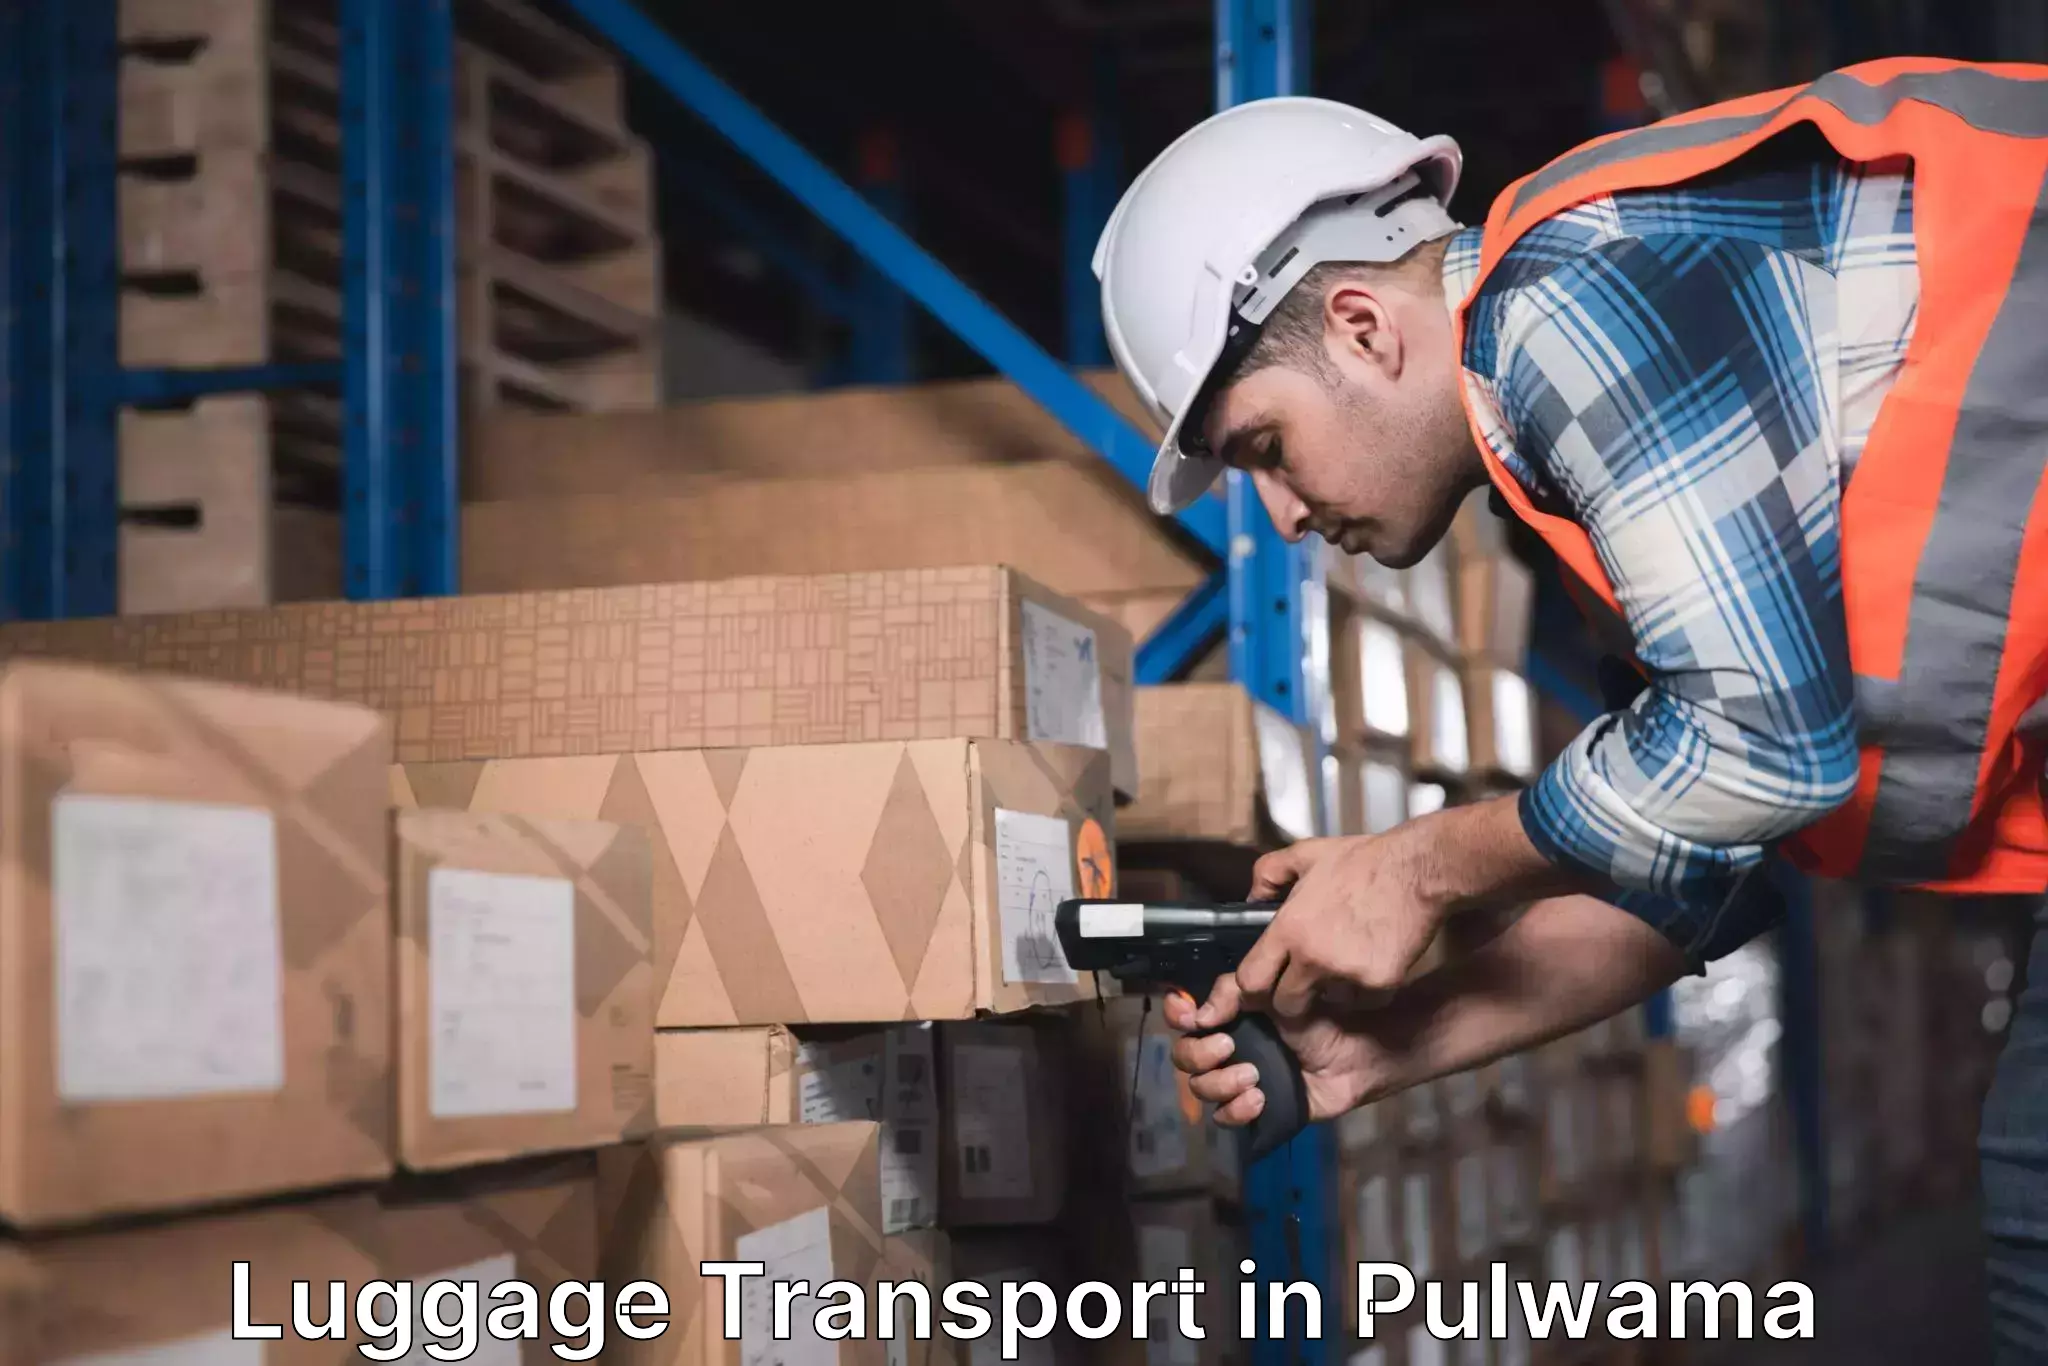 Luggage transport operations in Pulwama